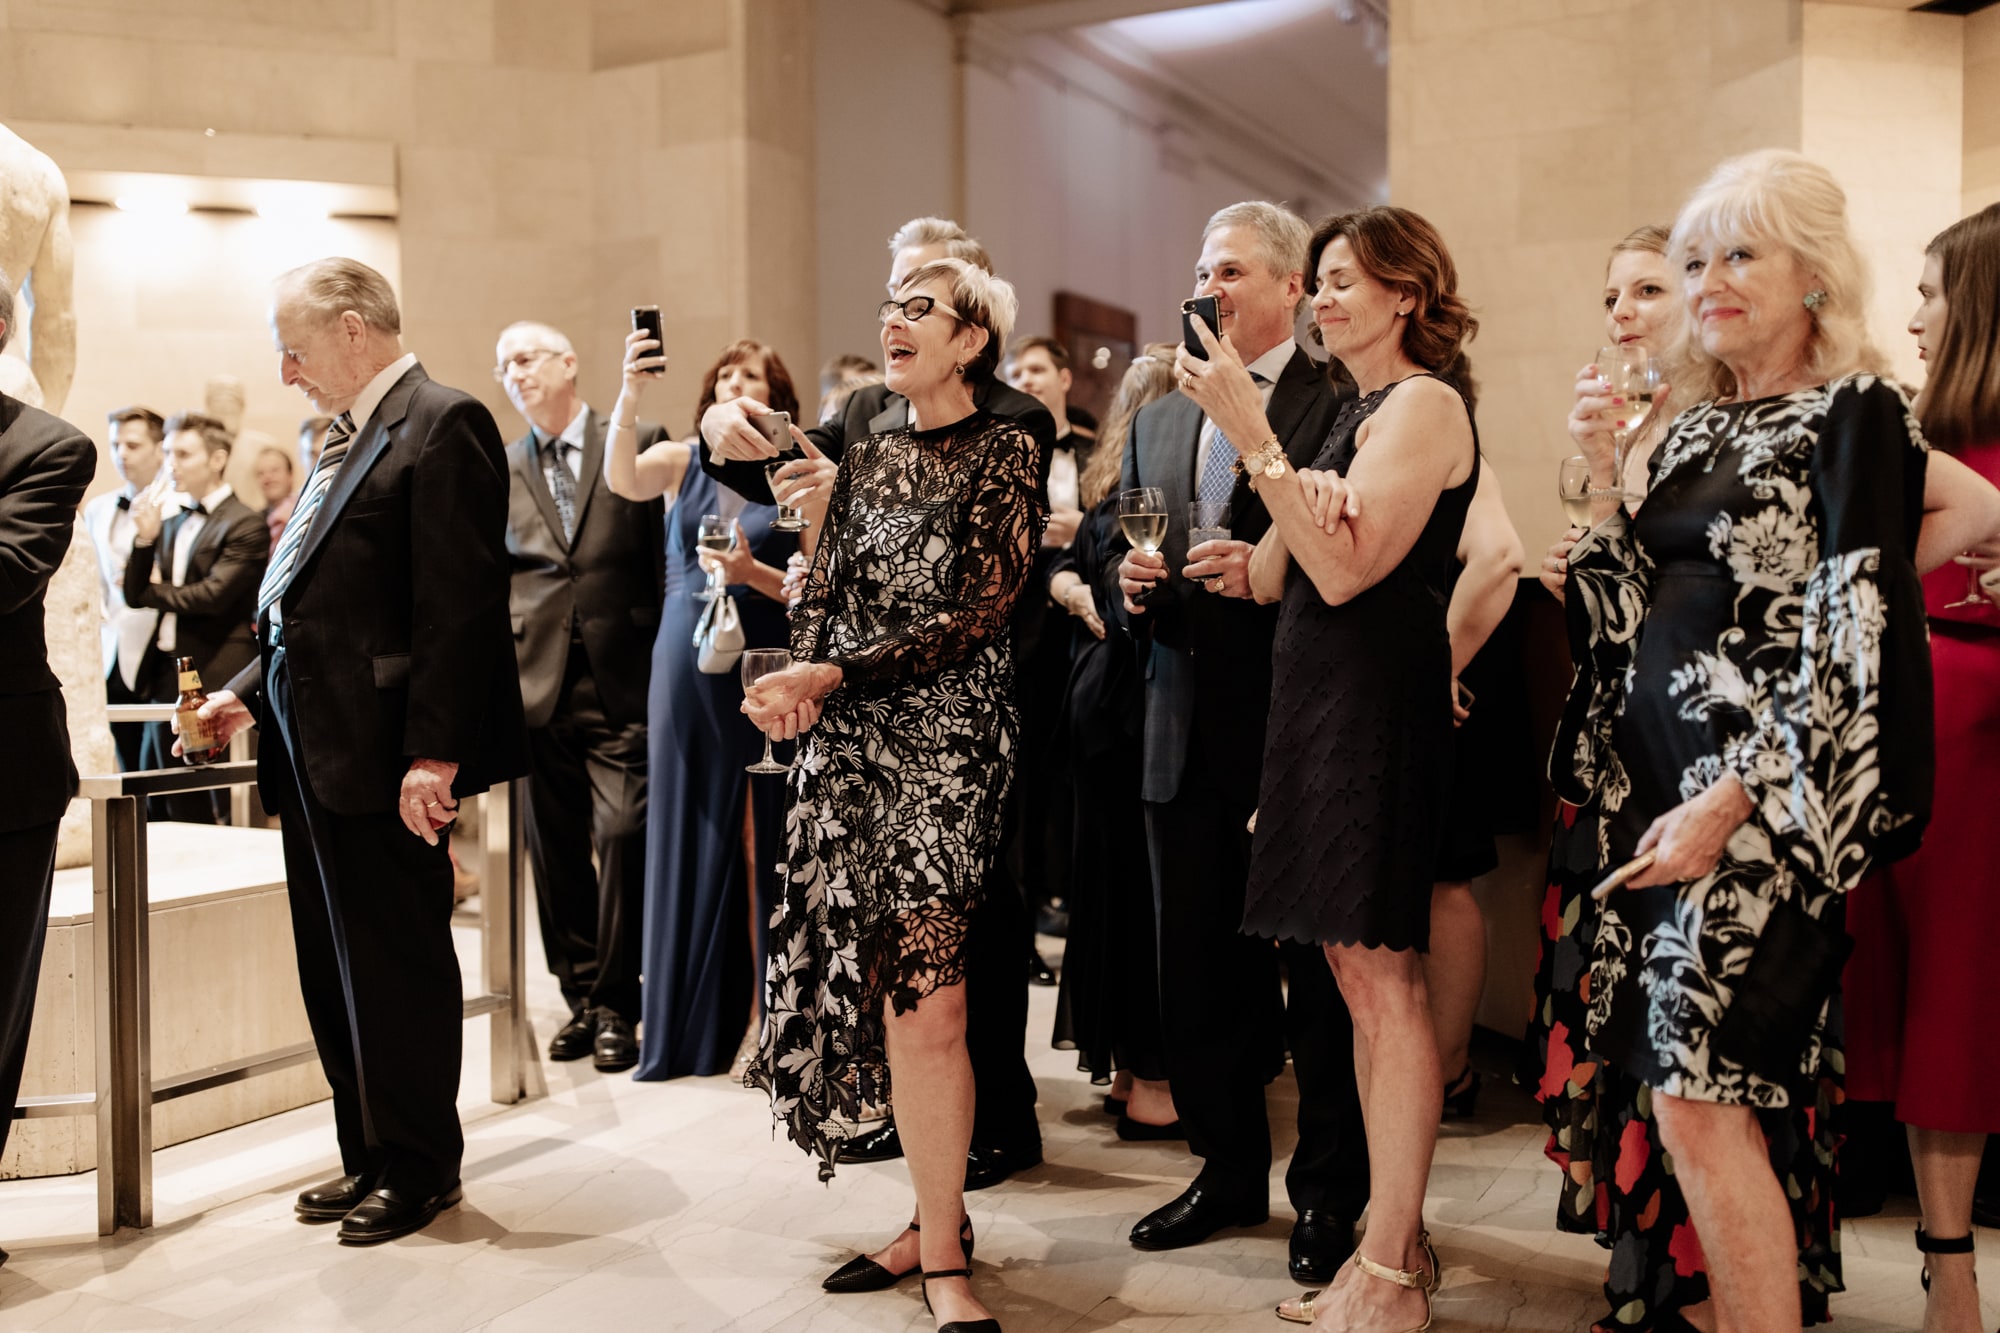 Guests smile and take pictures on their cellphones during wedding speeches inside the Minneapolis Institute of Art.